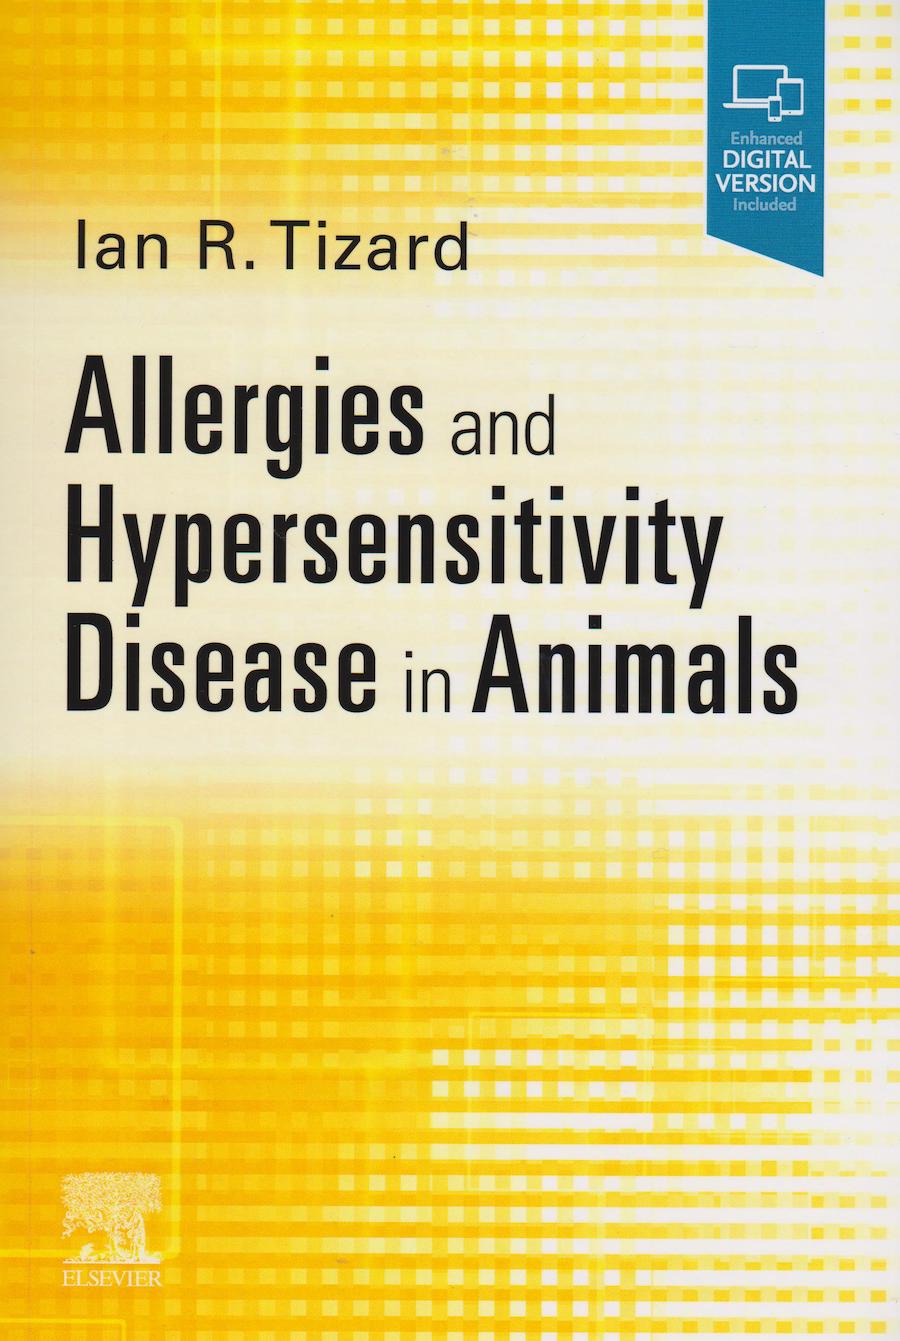 Allergies and hypersensitivity disease in animals